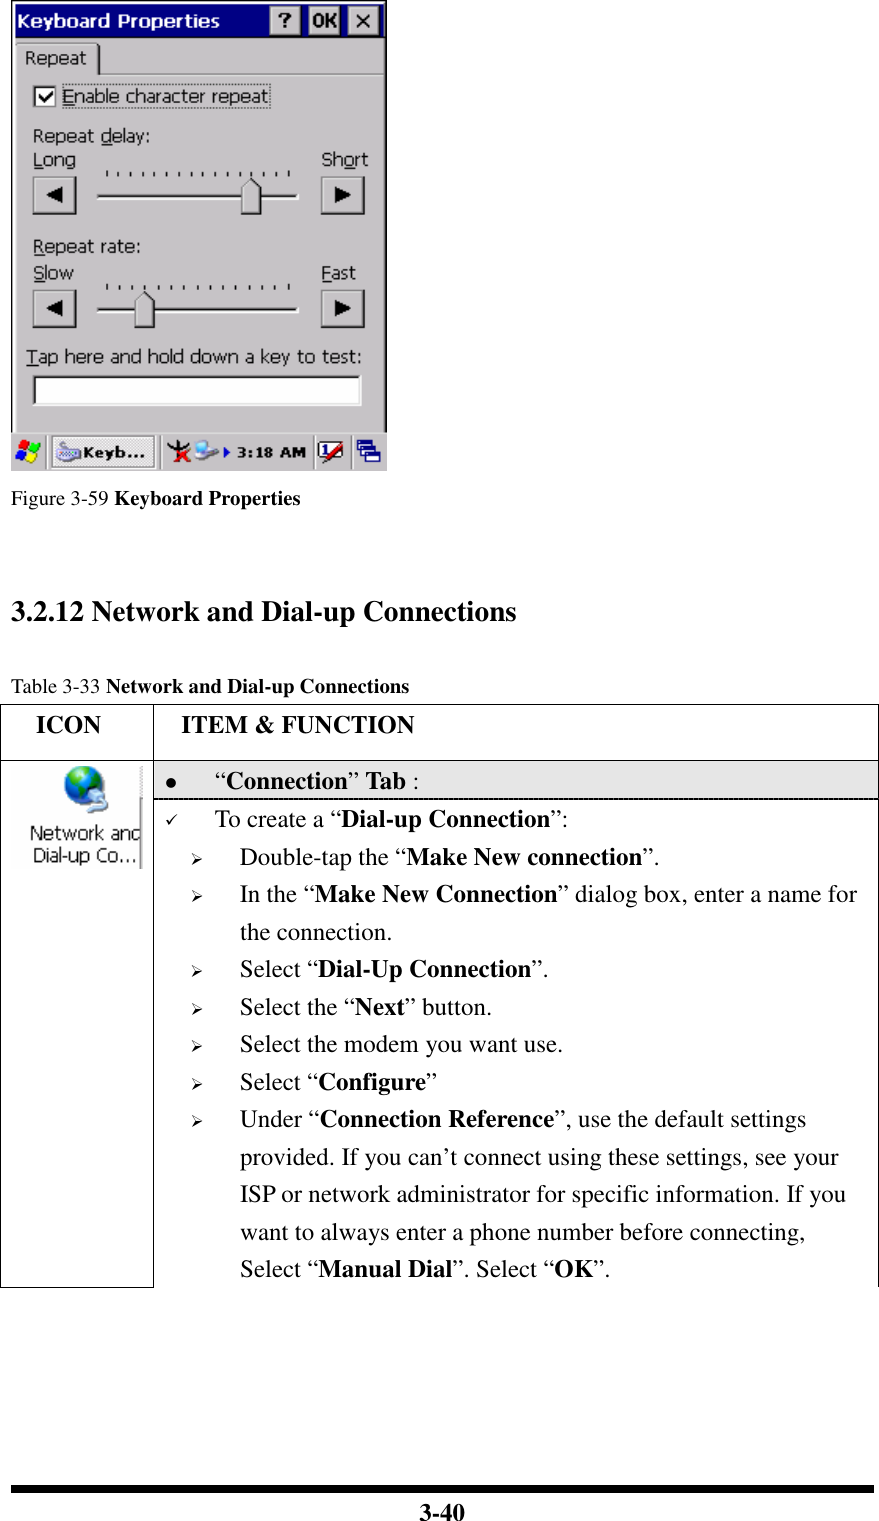  3-40  Figure 3-59 Keyboard Properties   3.2.12 Network and Dial-up Connections  Table 3-33 Network and Dial-up Connections     ICON  ITEM &amp; FUNCTION  “Connection” Tab :    To create a “Dial-up Connection”:  Double-tap the “Make New connection”.  In the “Make New Connection” dialog box, enter a name for the connection.  Select “Dial-Up Connection”.  Select the “Next” button.  Select the modem you want use.  Select “Configure”  Under “Connection Reference”, use the default settings provided. If you can’t connect using these settings, see your ISP or network administrator for specific information. If you want to always enter a phone number before connecting, Select “Manual Dial”. Select “OK”. 